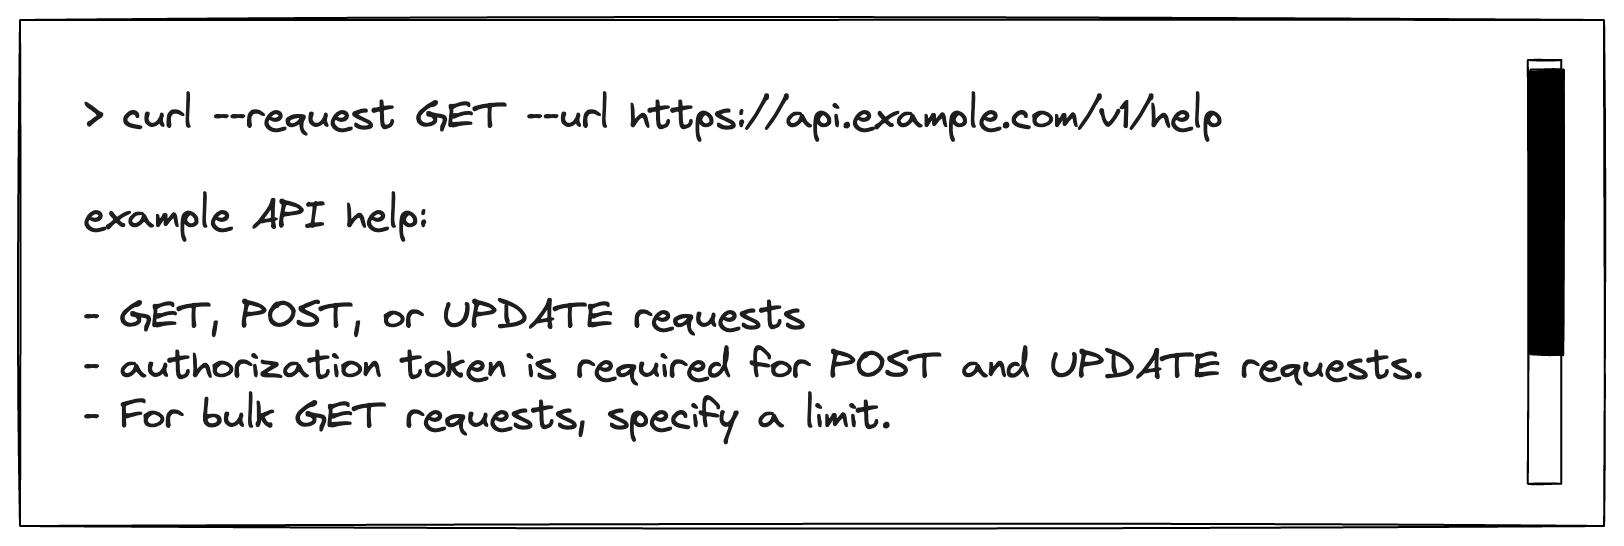 Mockup of a command line curl request to an endpoint, https://api.example.com/v1/help, with example output of example API help: GET, POST, or UPDATE requests, authorization token is required for POST and UPDATE requests, For bulk GET requests, specify a limit.